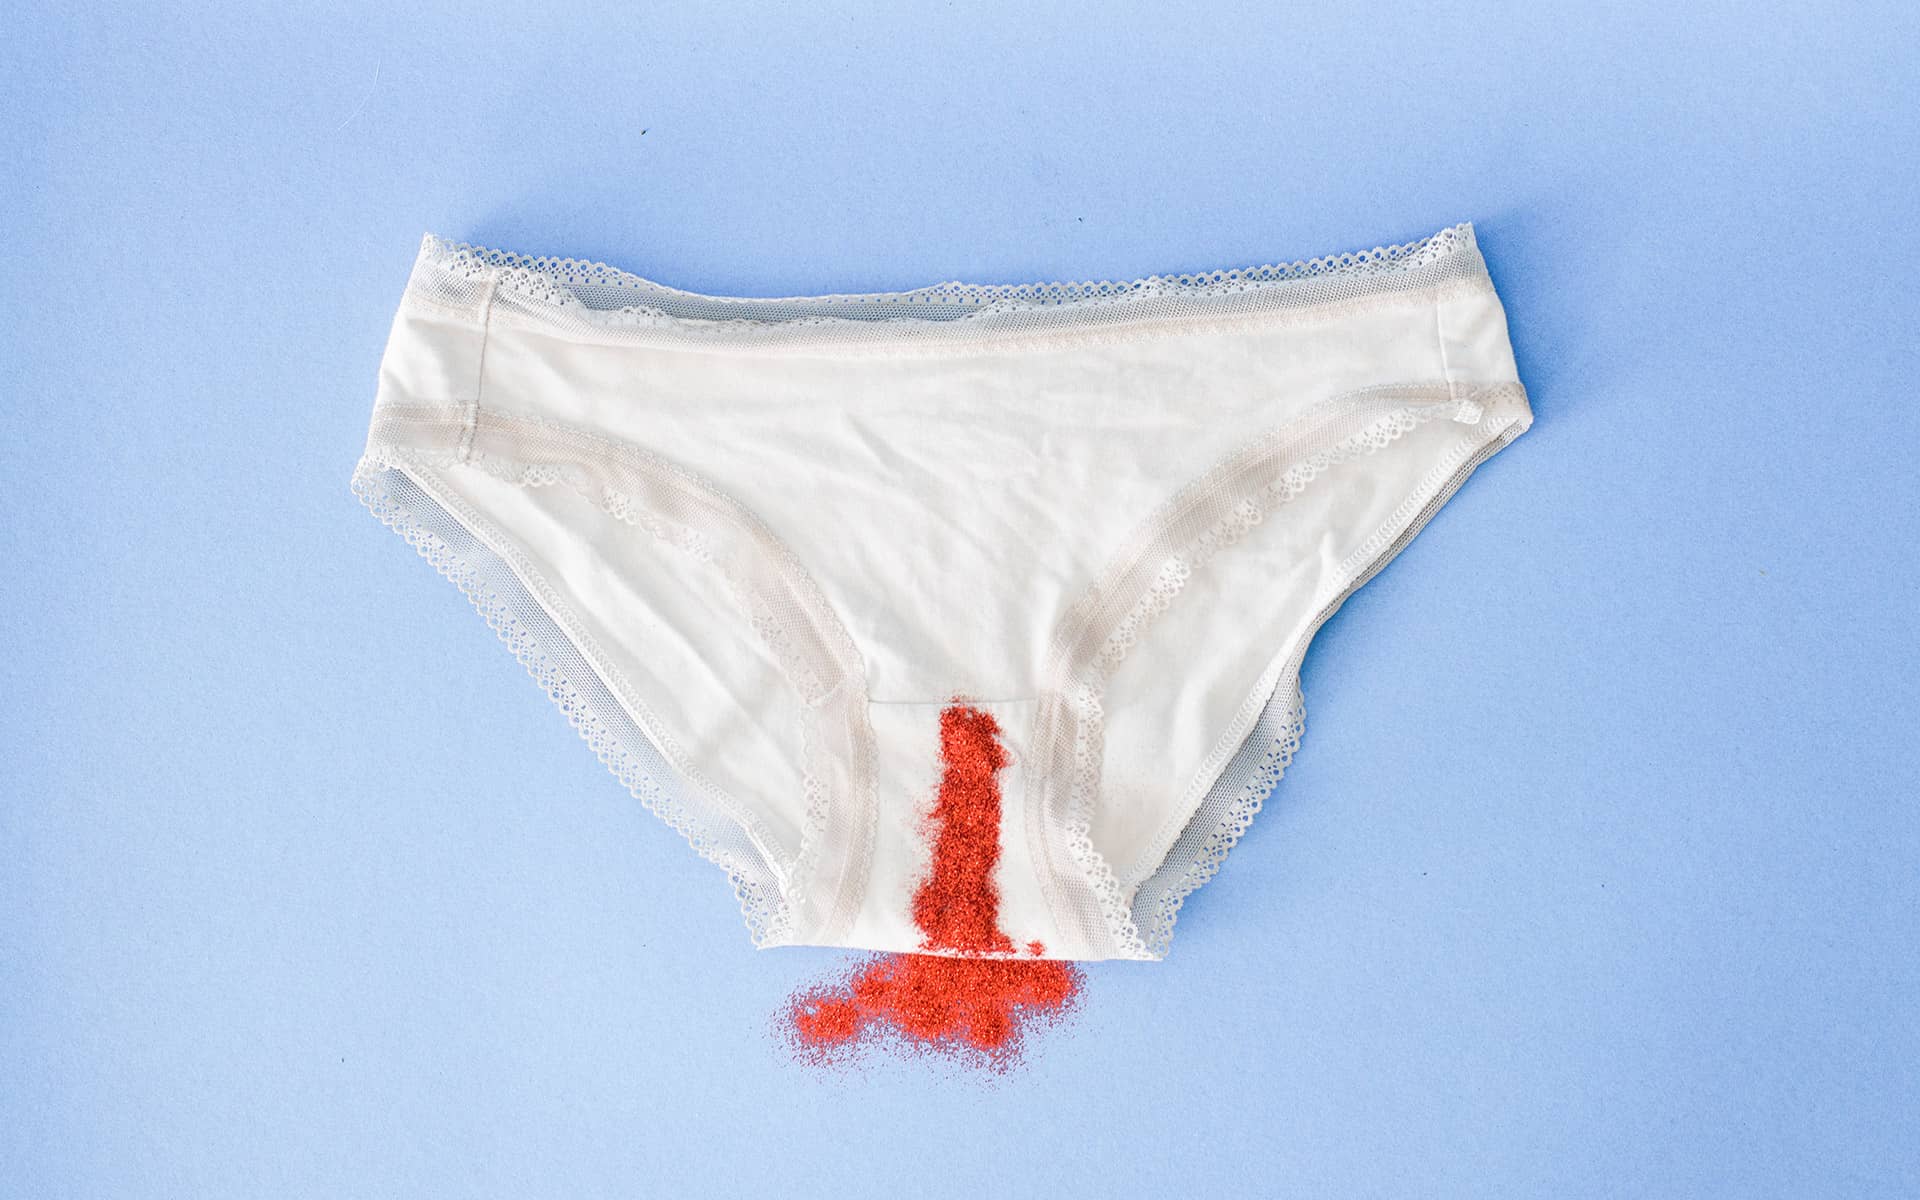 White underwear stained with chilli powder to resemble menstrual blood